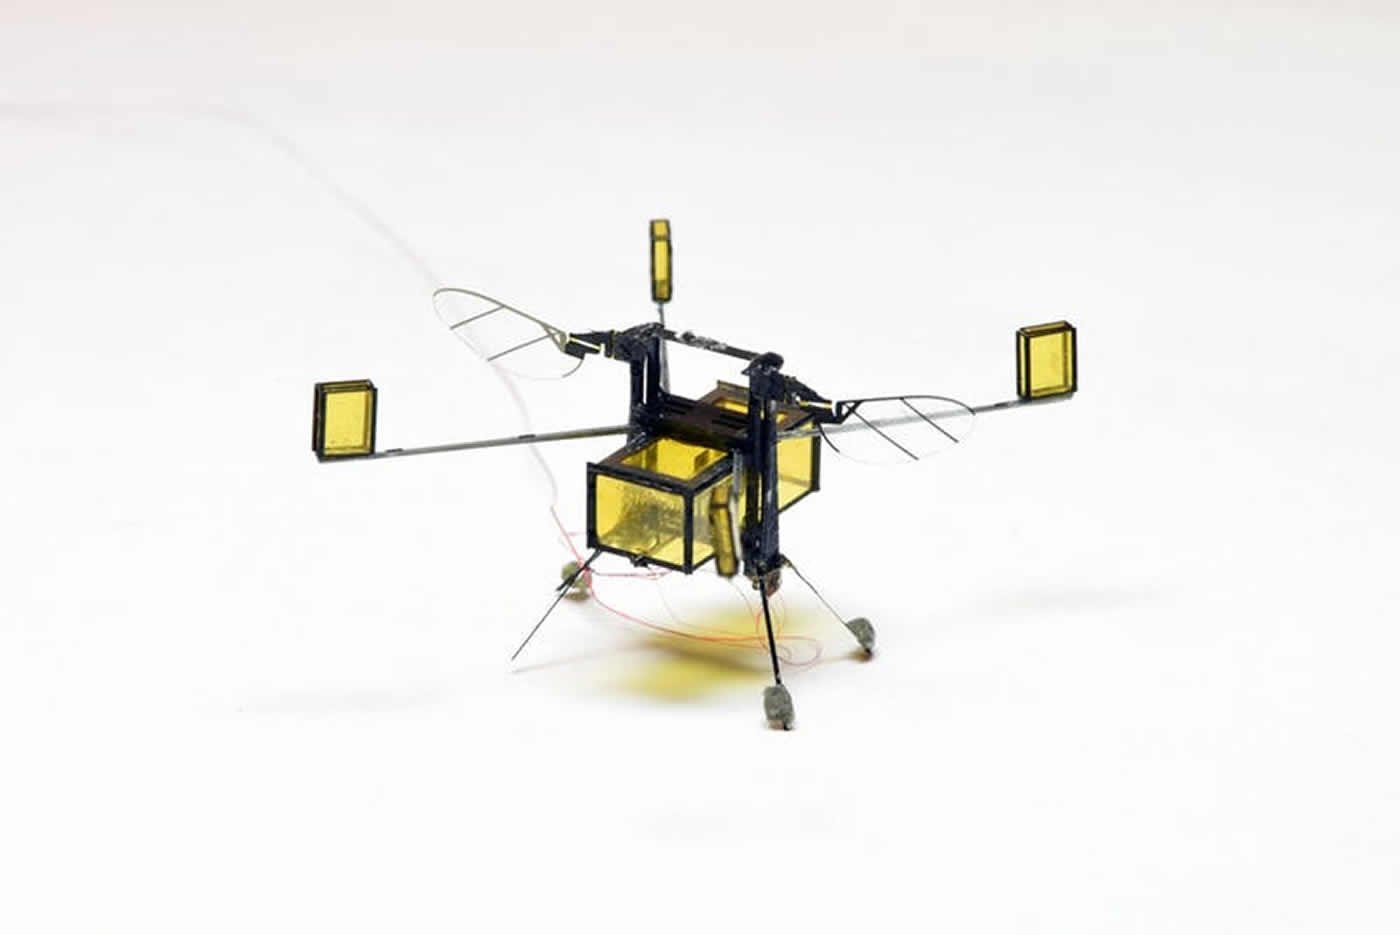 Image shows the RoboBee.